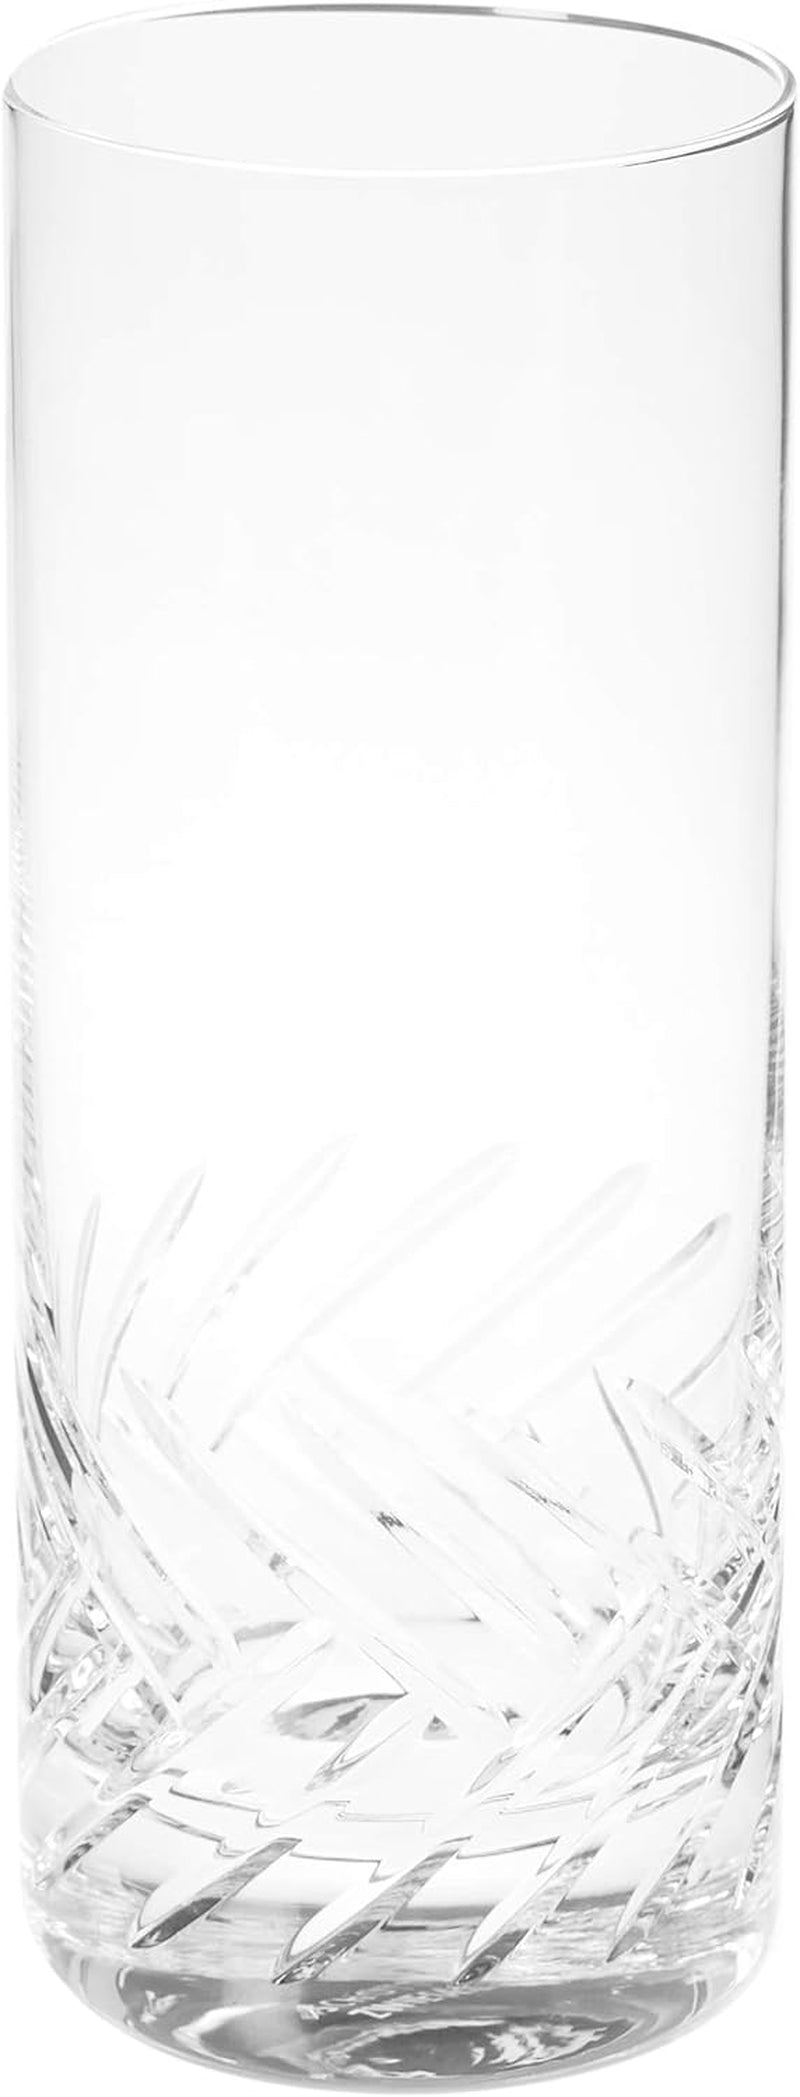 Schott Zwiesel Tritan Crystal Glass Distil Barware Collection Kirkwall Collins Cocktail Glasses (Set of 6), 11.1 oz, Clear